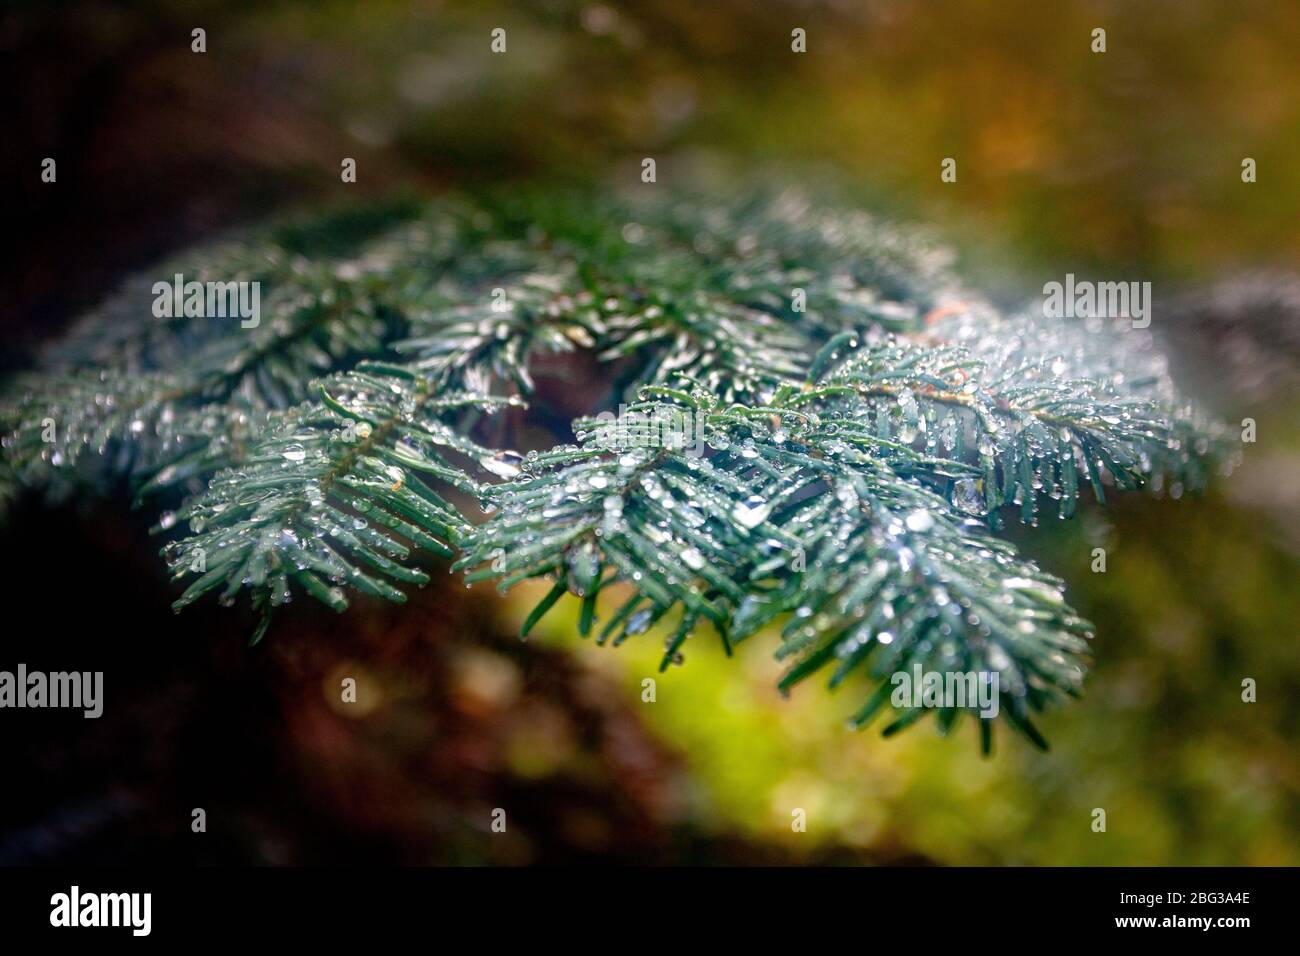 Dew beads of water on a hemlock branch in a forest Stock Photo